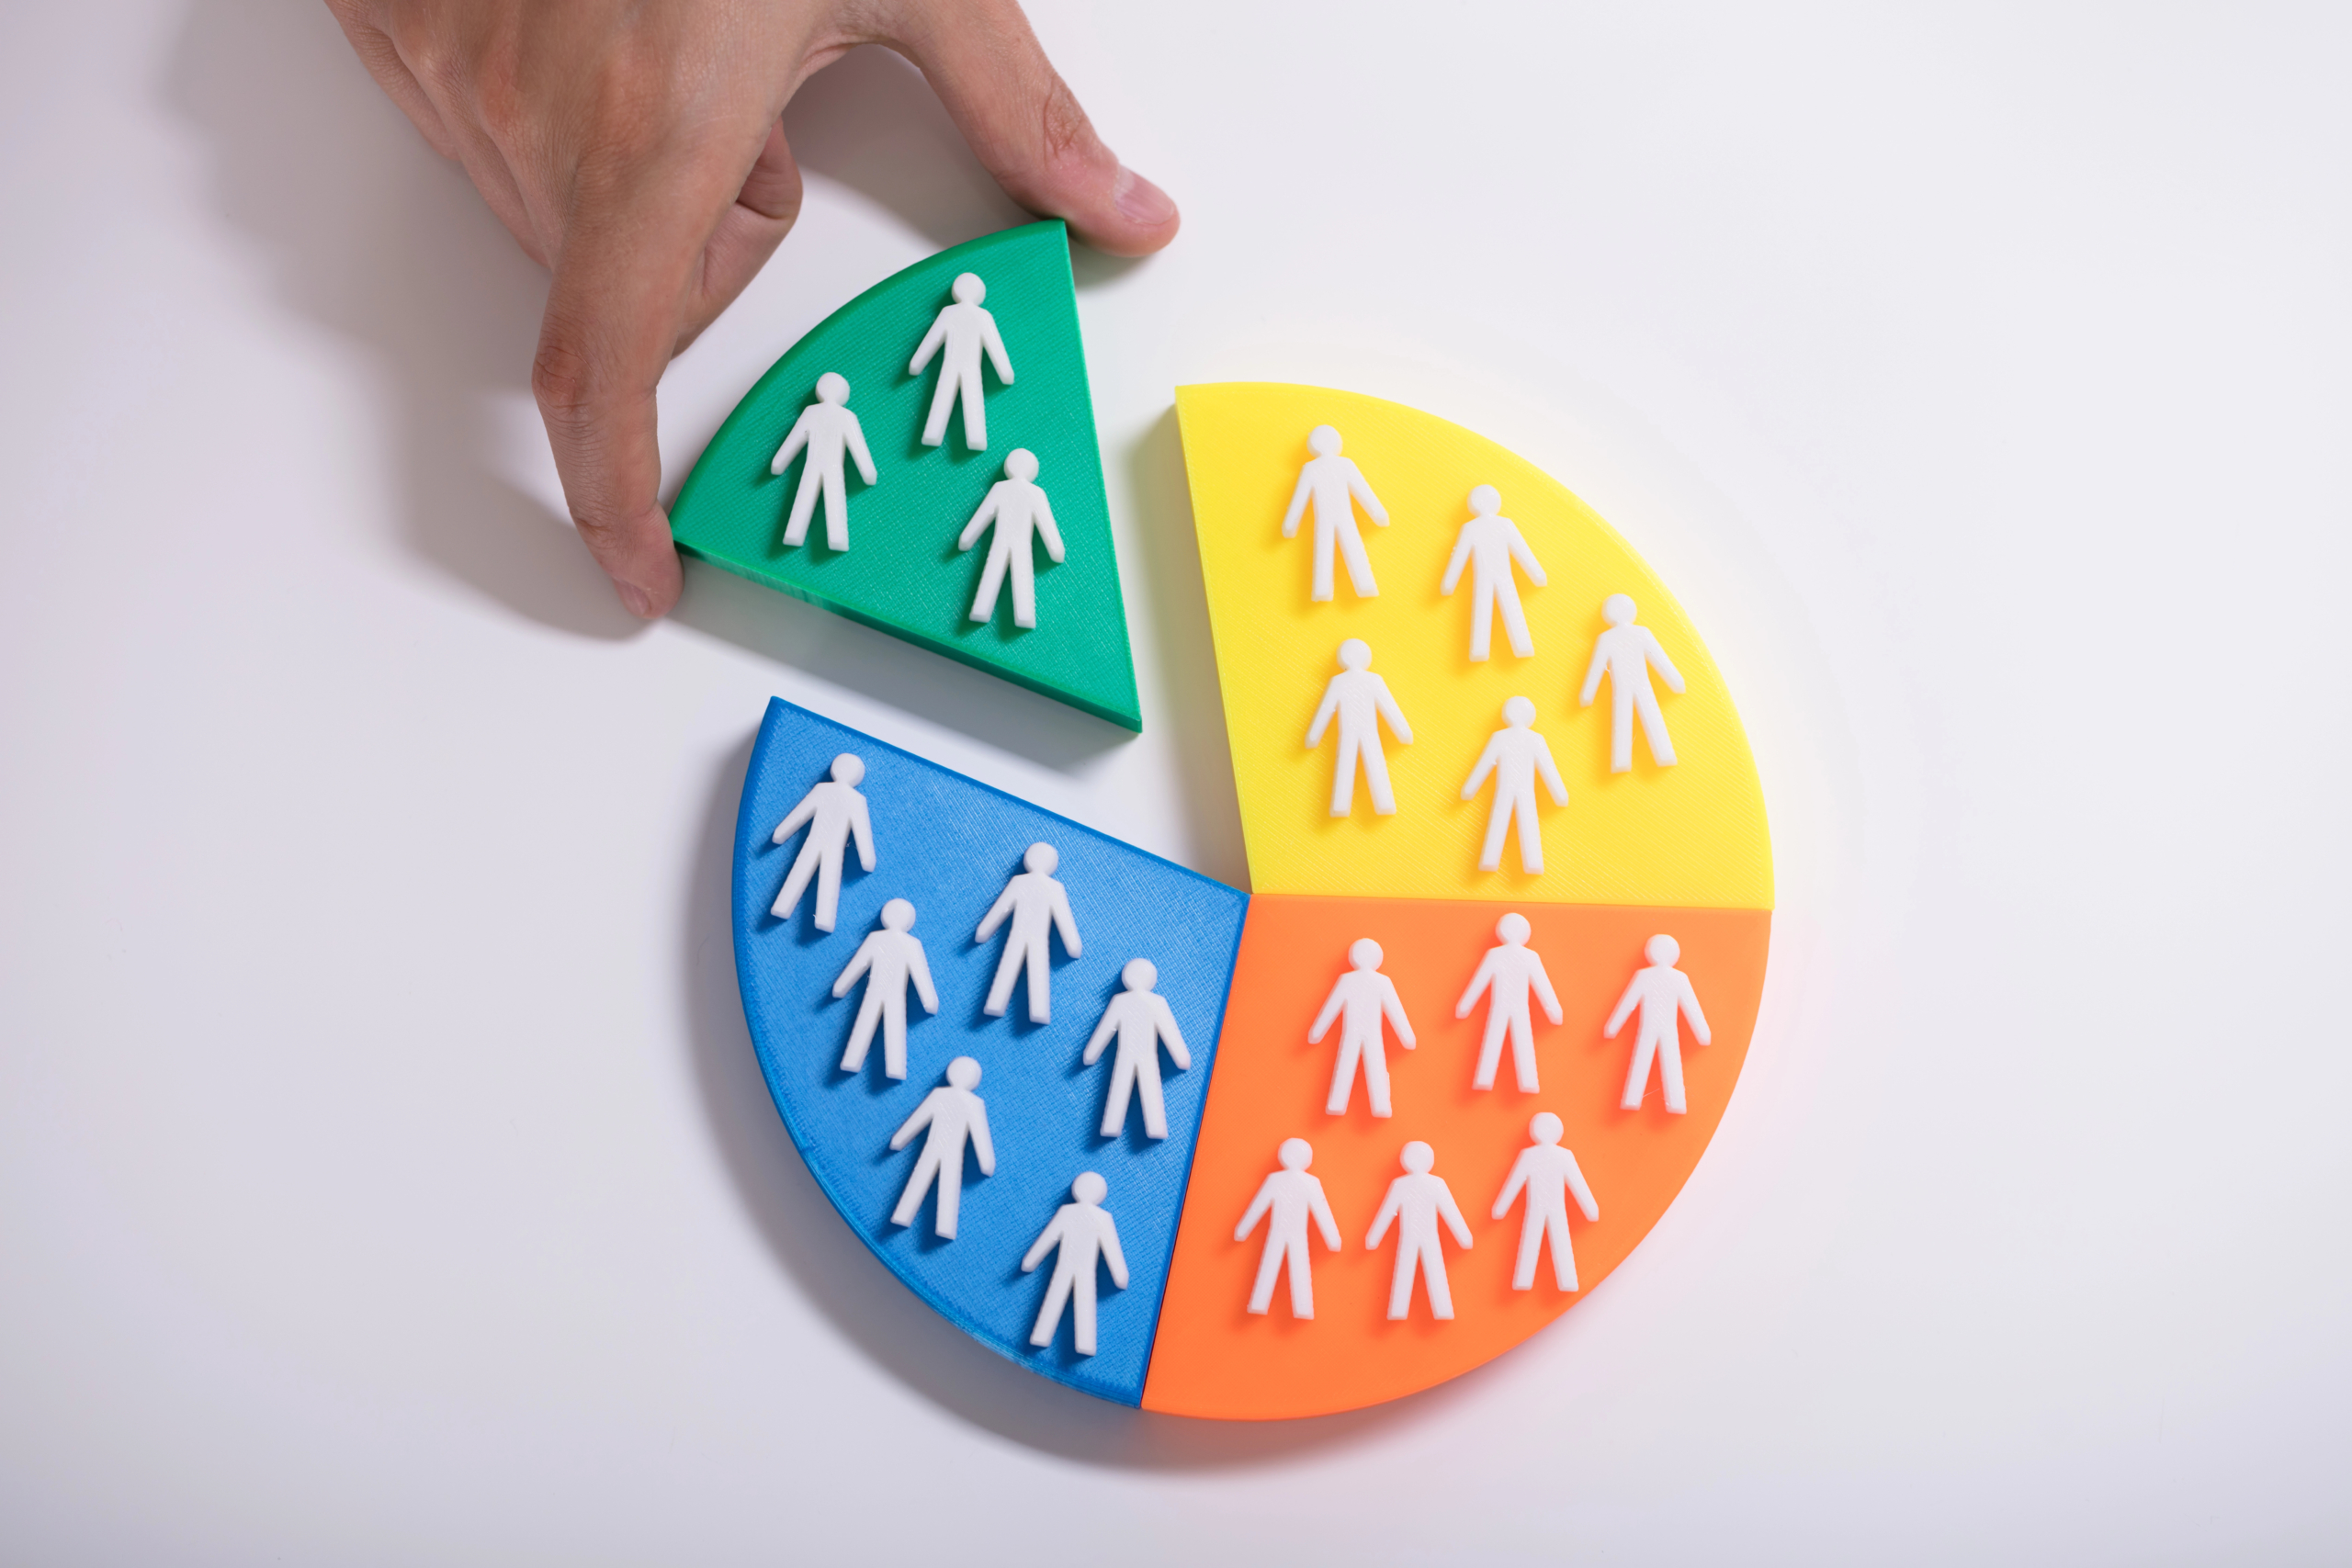 Hand pulling out a piece of a pie graph with human silhouettes, representing customer segmentation